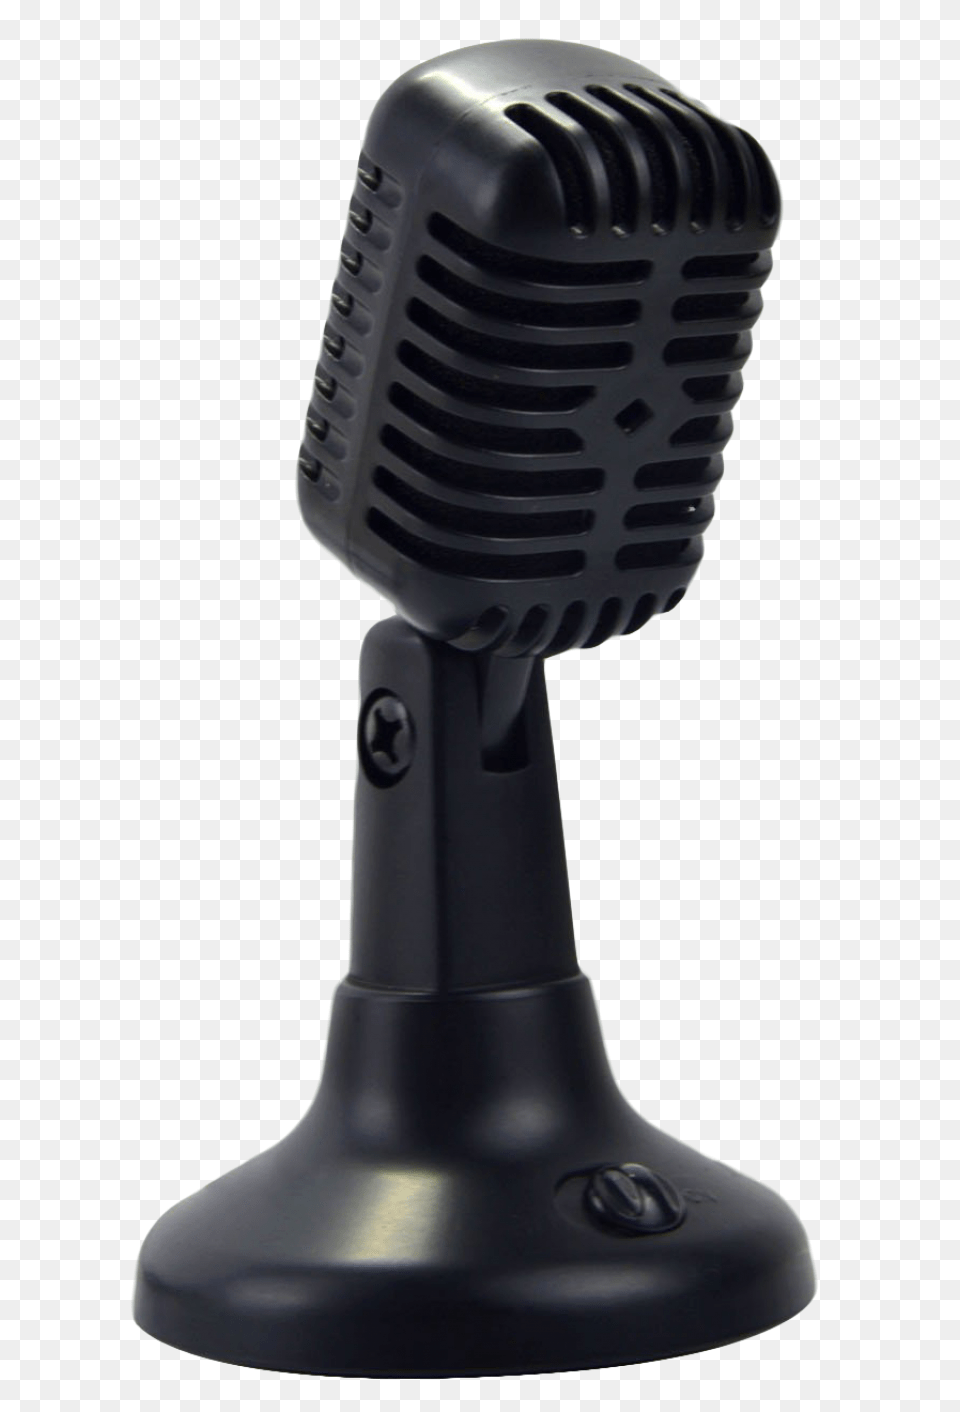 Podcast Microphone Image For Podcast Mic Transparent, Electrical Device, Smoke Pipe Free Png Download